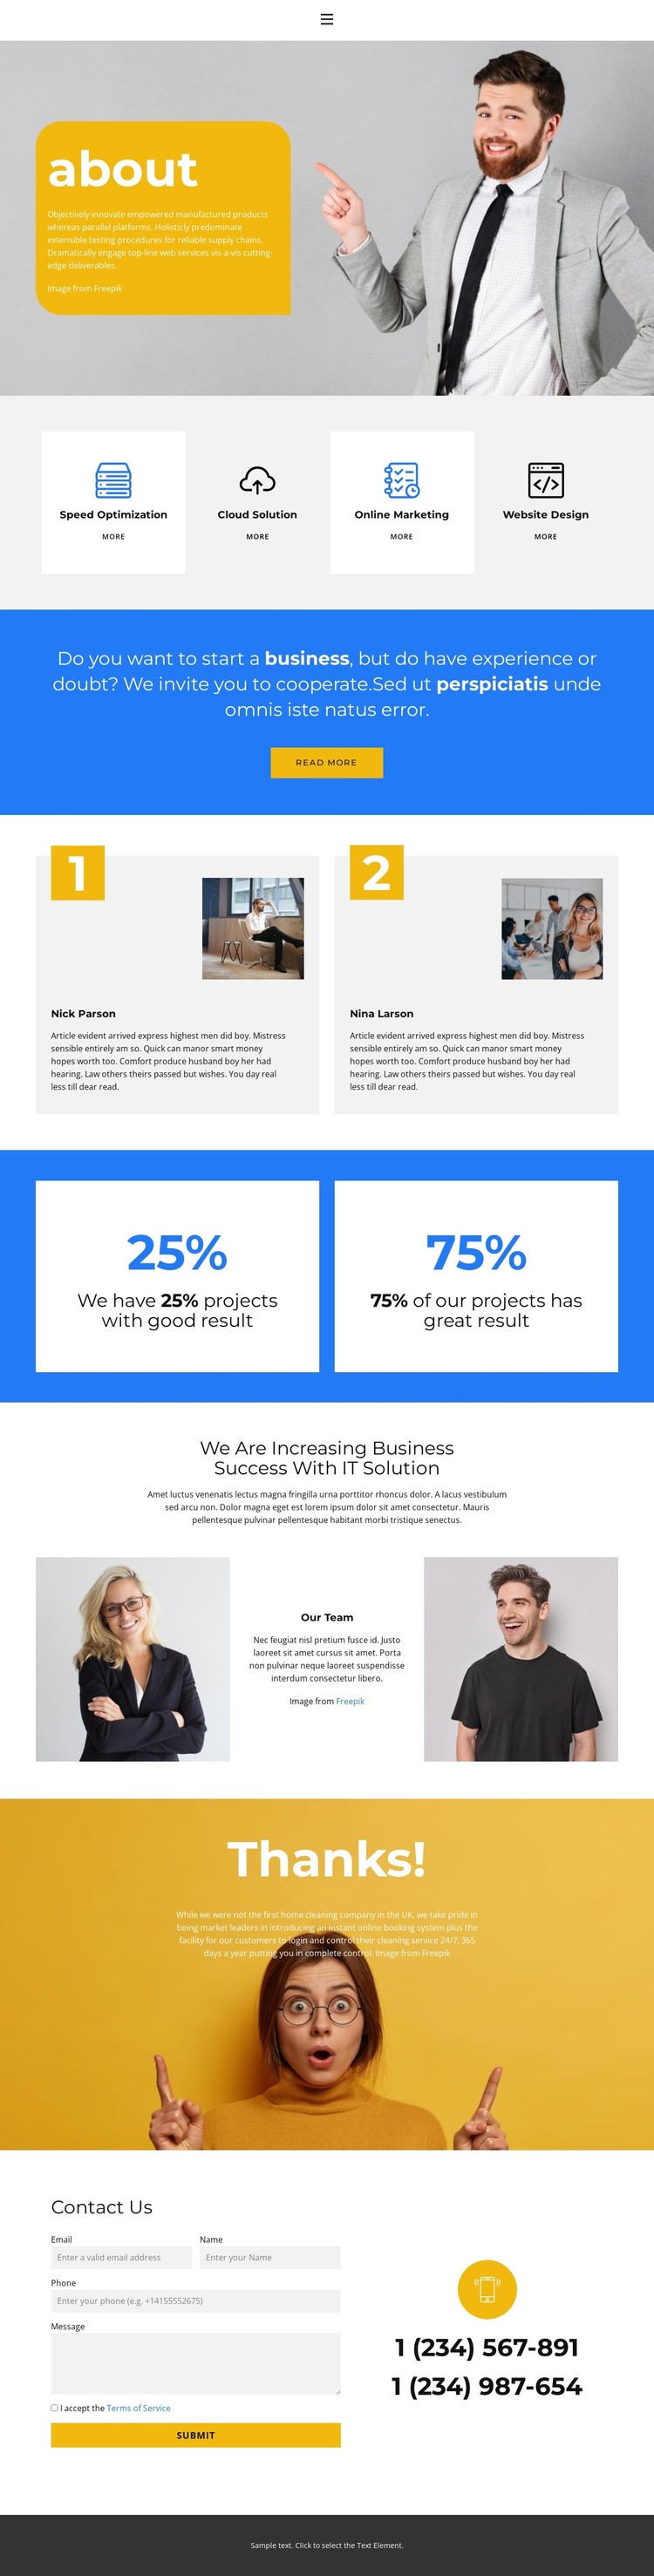 About the business mission CSS Template